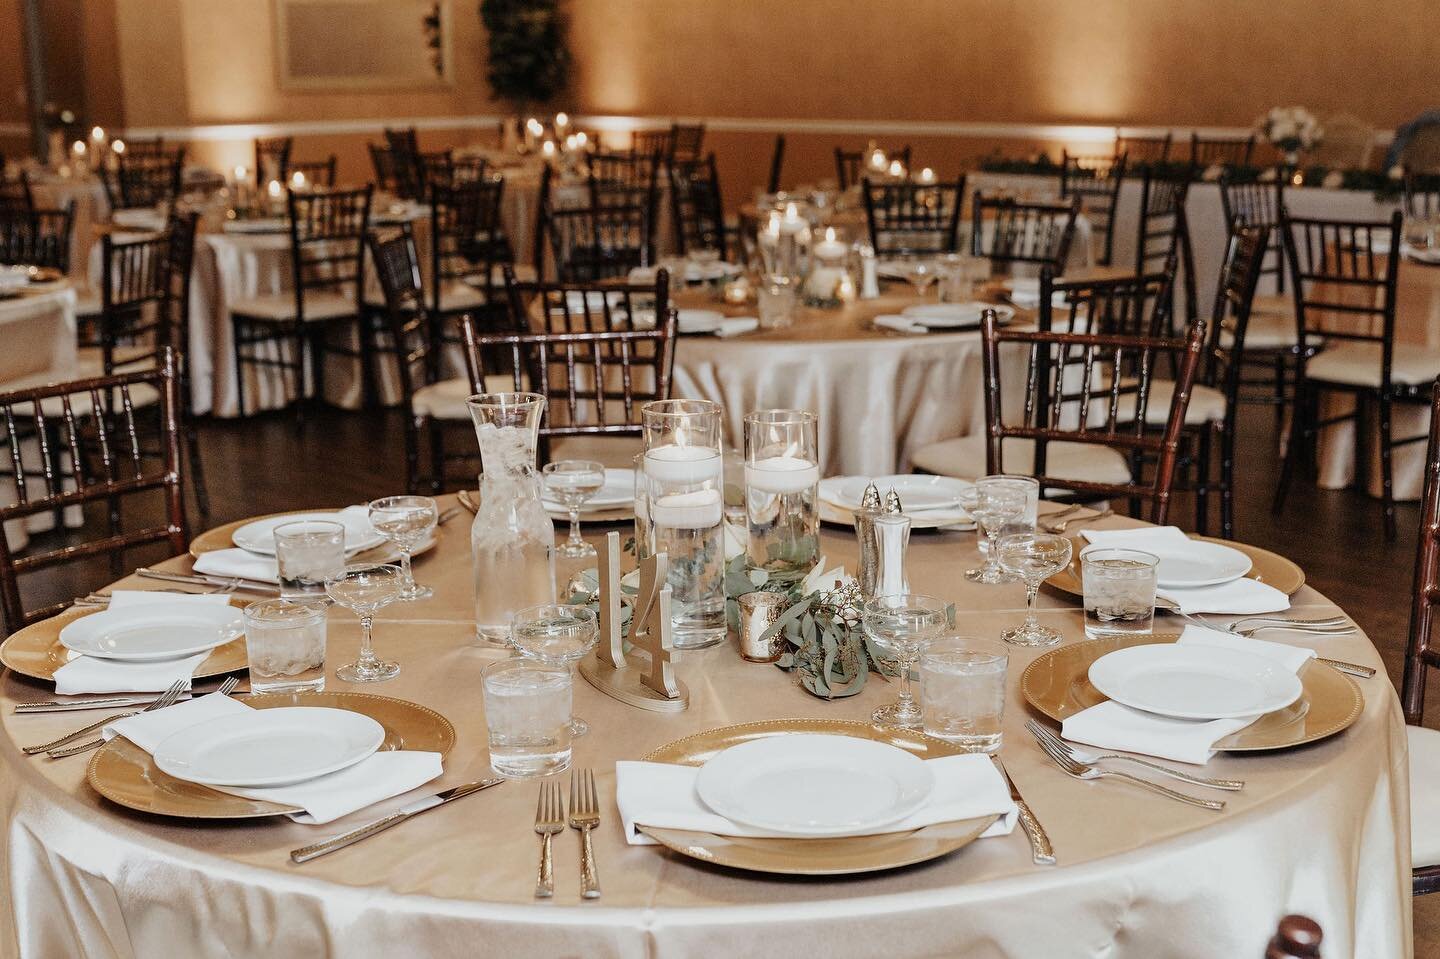 ⚜️ Gold works so well in our ballroom 
Note the complimentary gold charger plates, glass pillar vases, and up lighting in the background - all included in your package among other amenities ✨

Photo: @marisaclaire.photo 
#goldwedding #champagnelinens